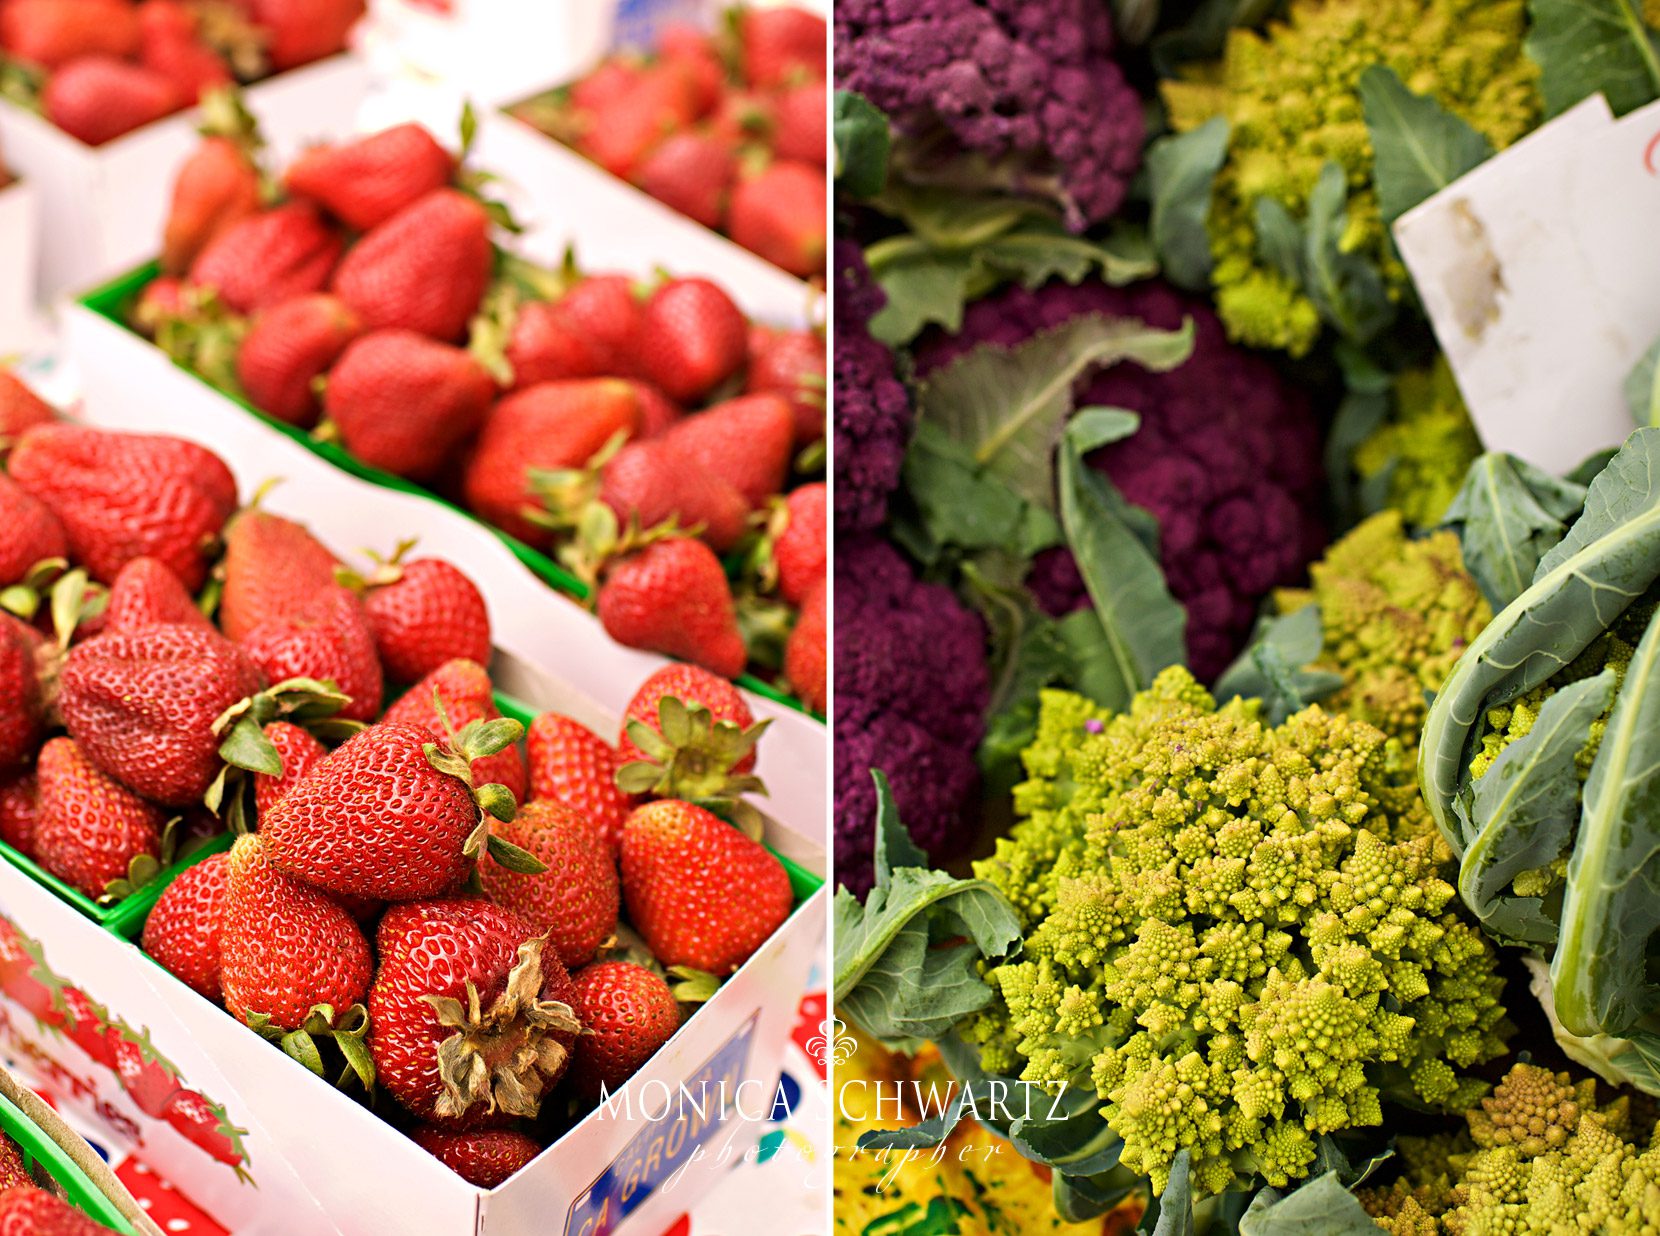 Strawberries-and-cauliflower-at-the-farmers-market-in-Carmel-by-the-Sea-California